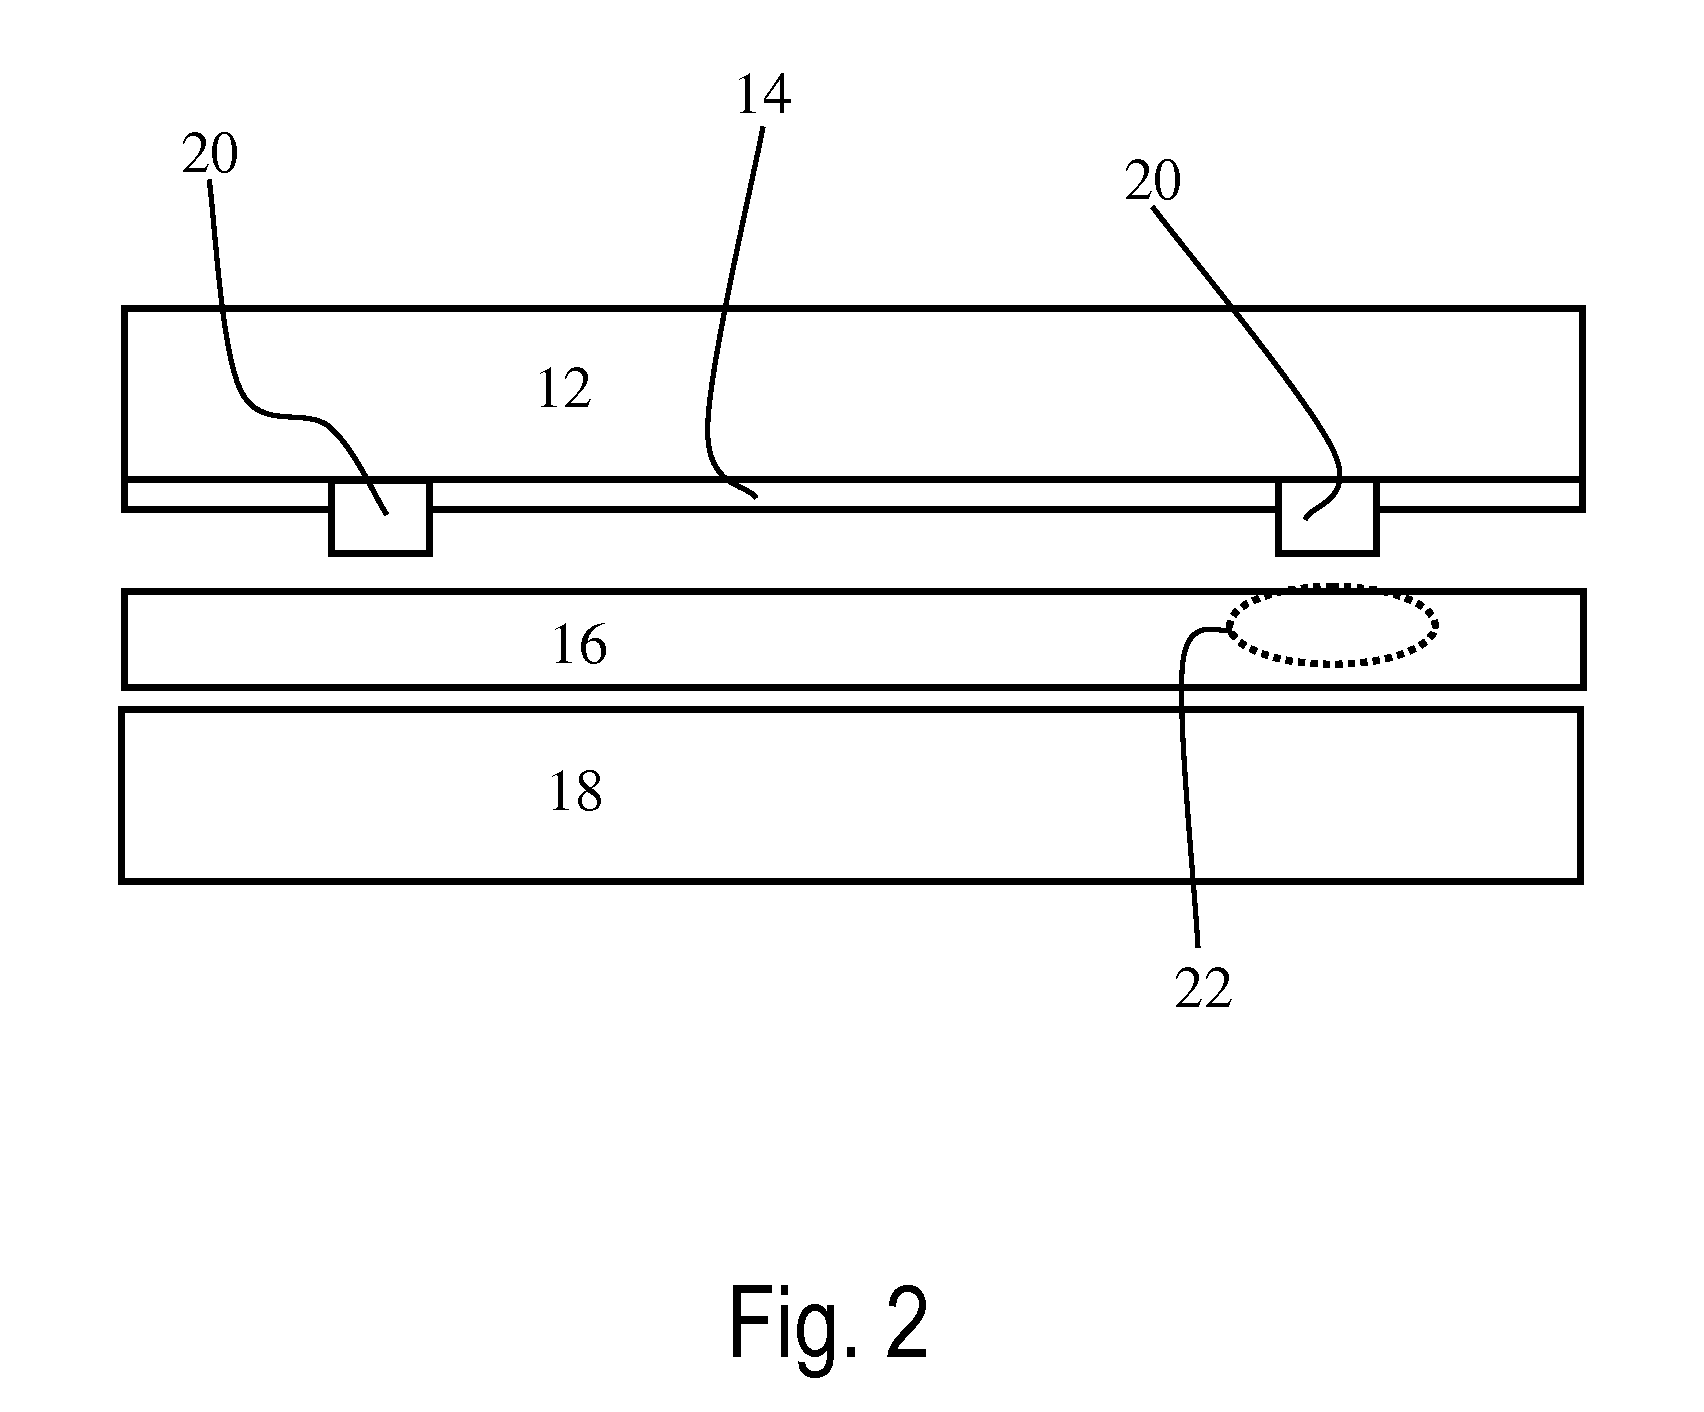 Thin Film Photovoltaic Module Having a Contoured Substrate